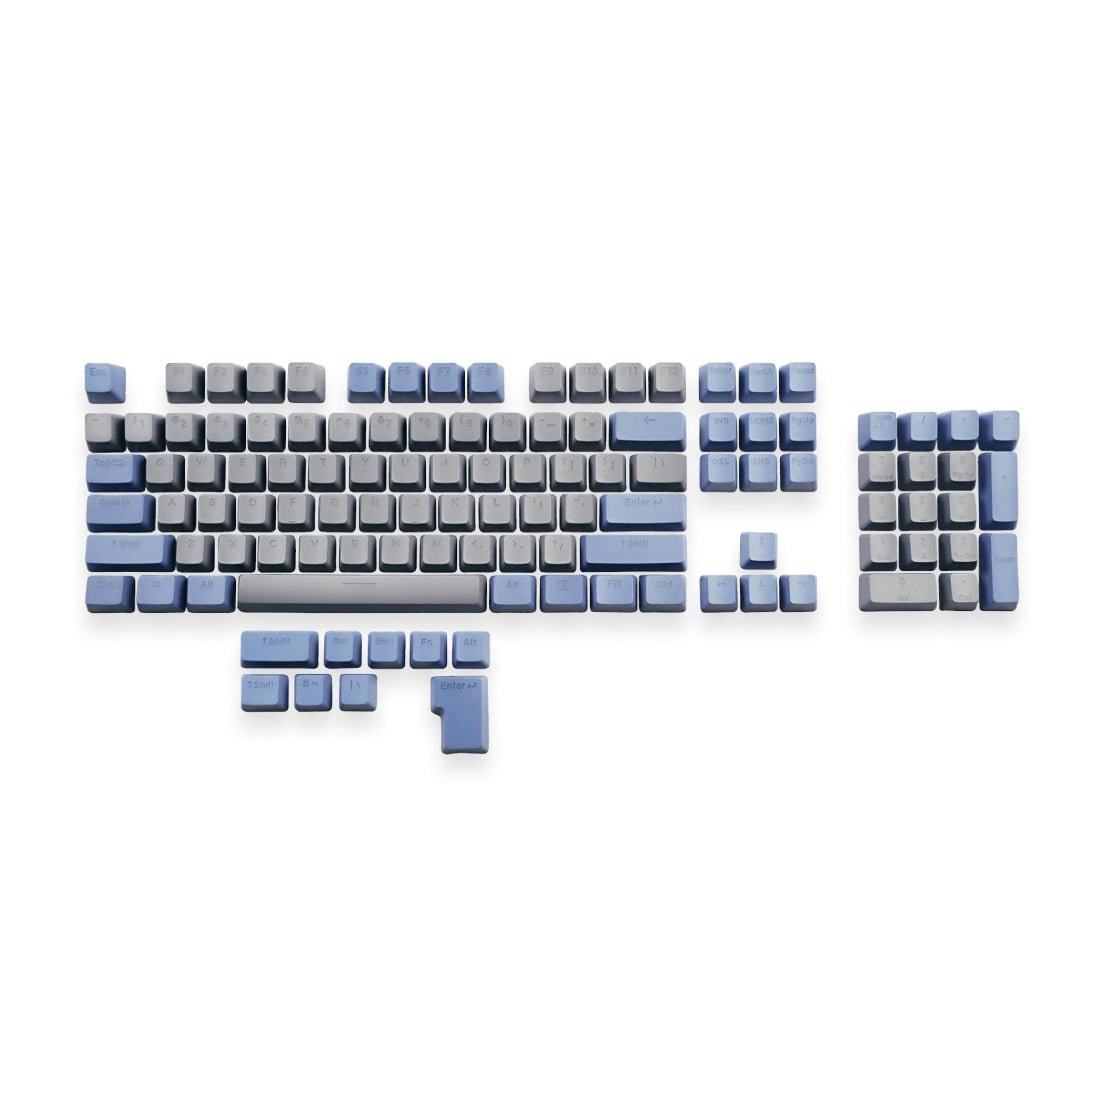 Mountain Mineral PBT Keycap set - Dolomite A - Store 974 | ستور ٩٧٤